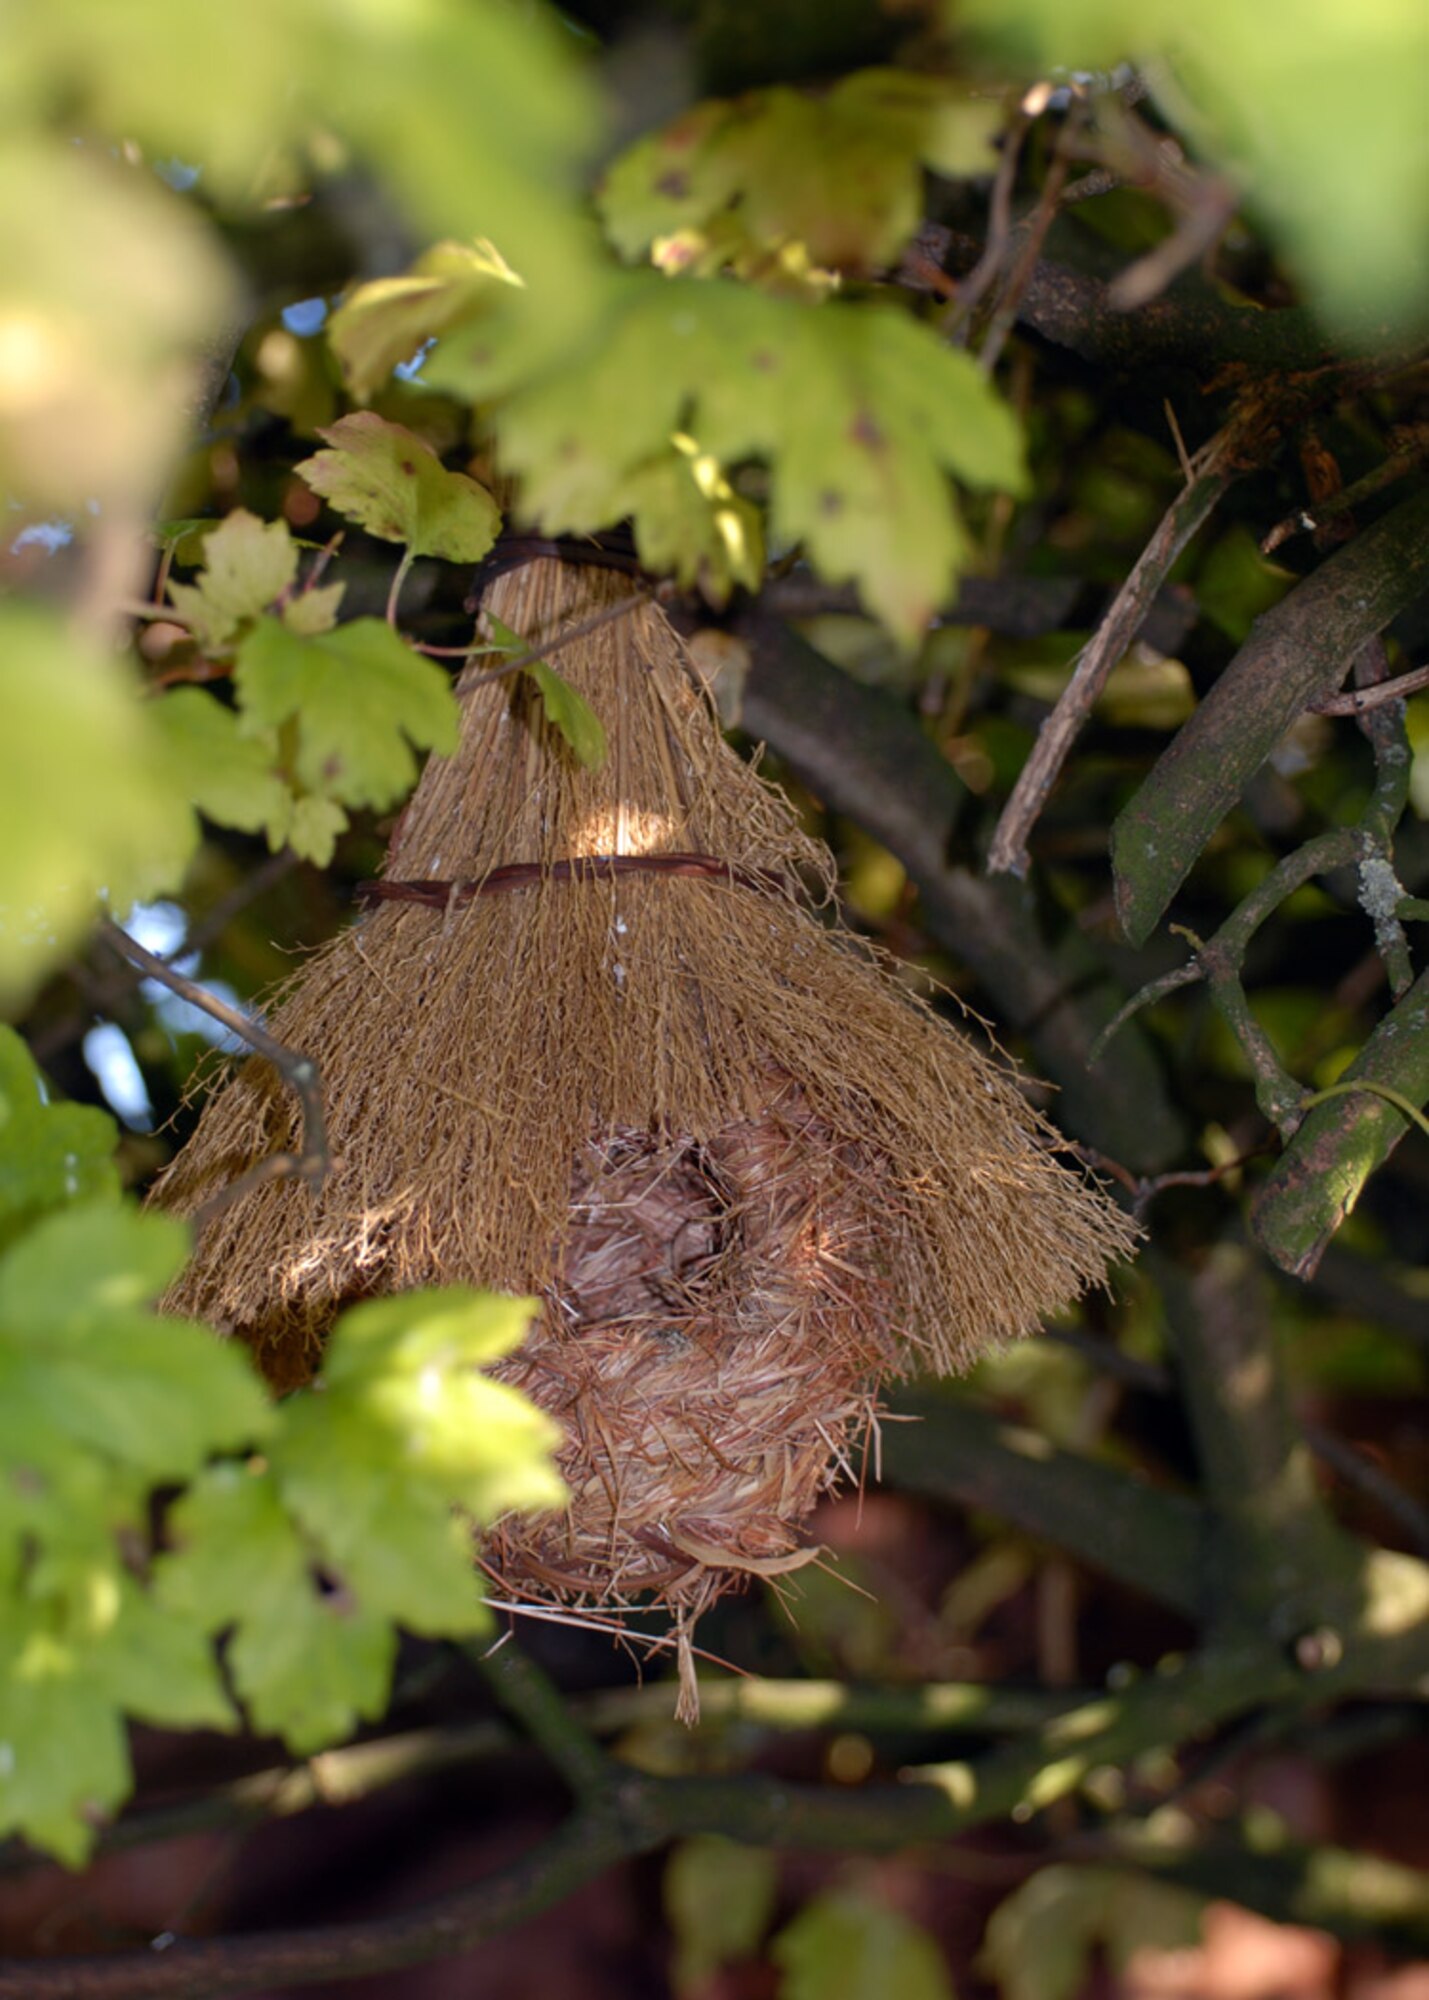 Shown here is a bird-roosting pocket for protection at night. (U.S. Air Force photo by Judith Wakelam)